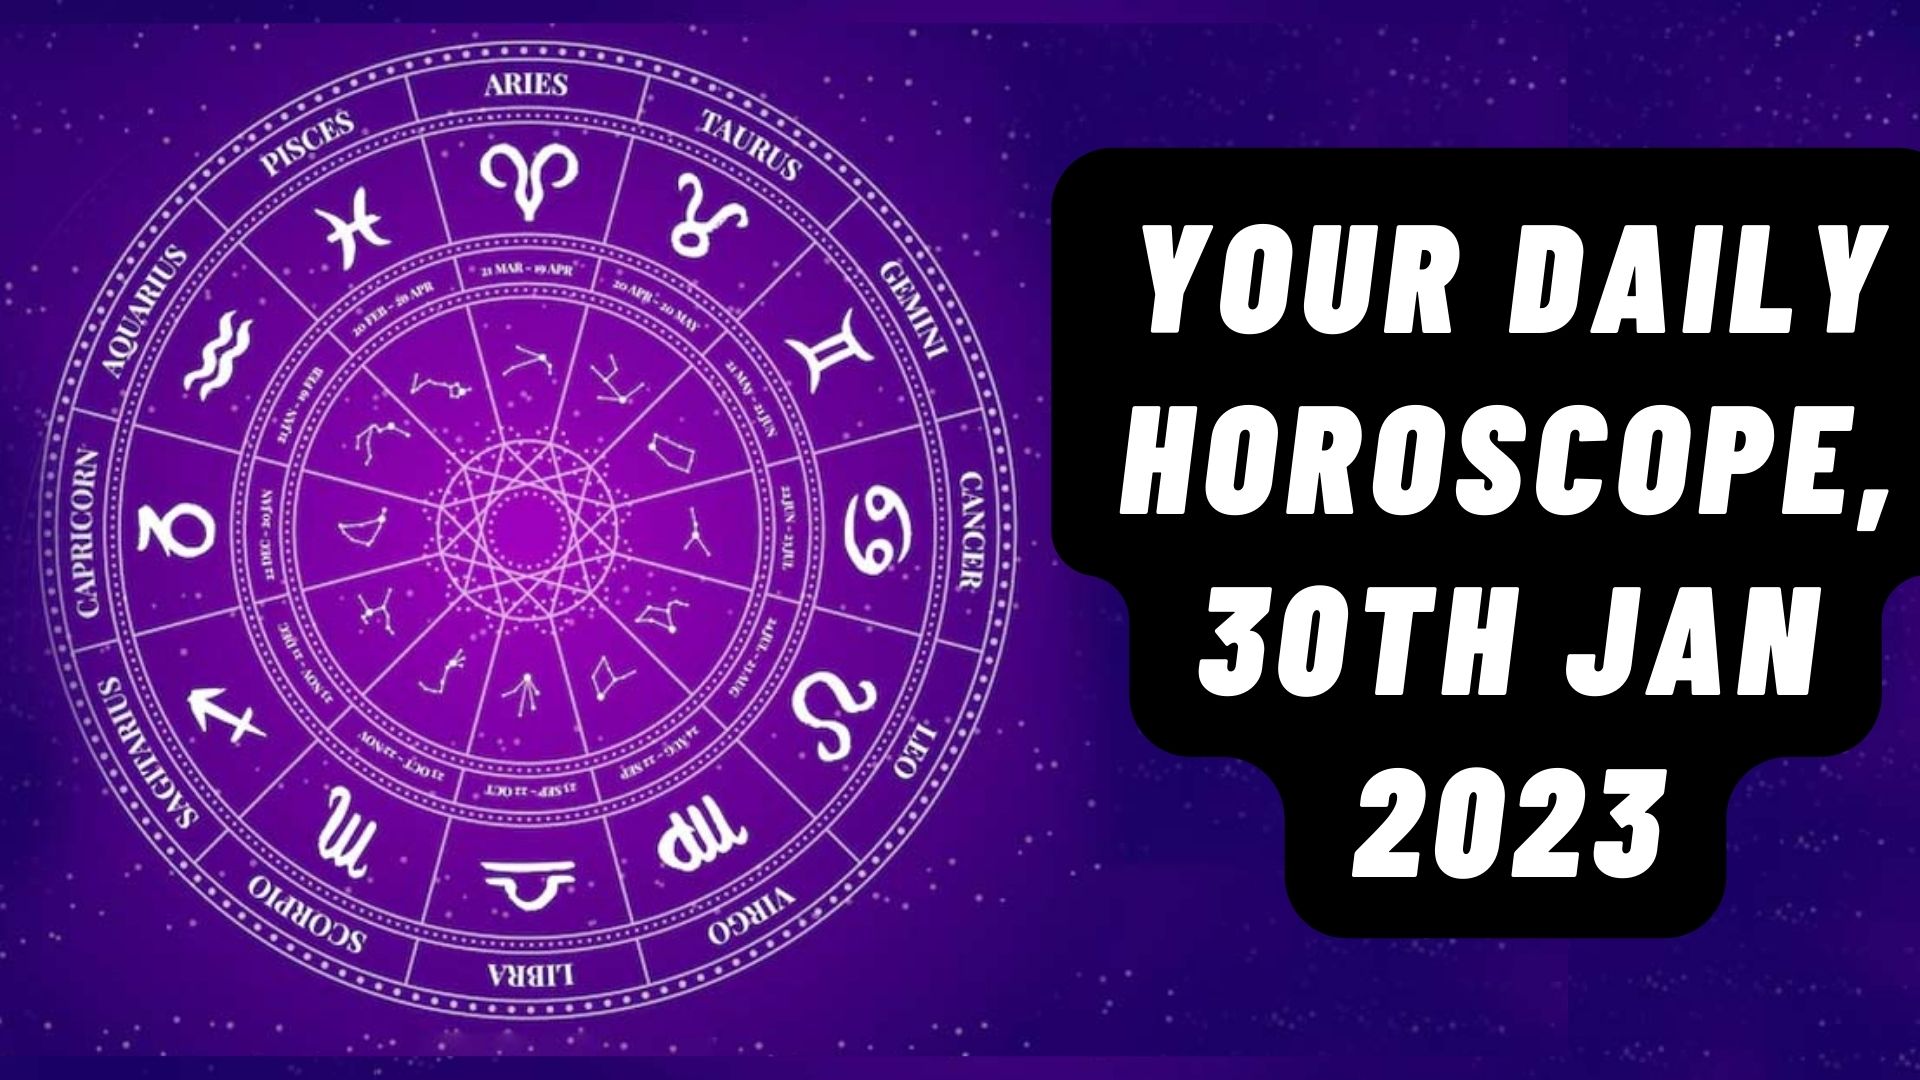 Your Daily Horoscope, 30th Jan 2023 - Taurus & Aquarius Will Get Money From Unexpected Sources